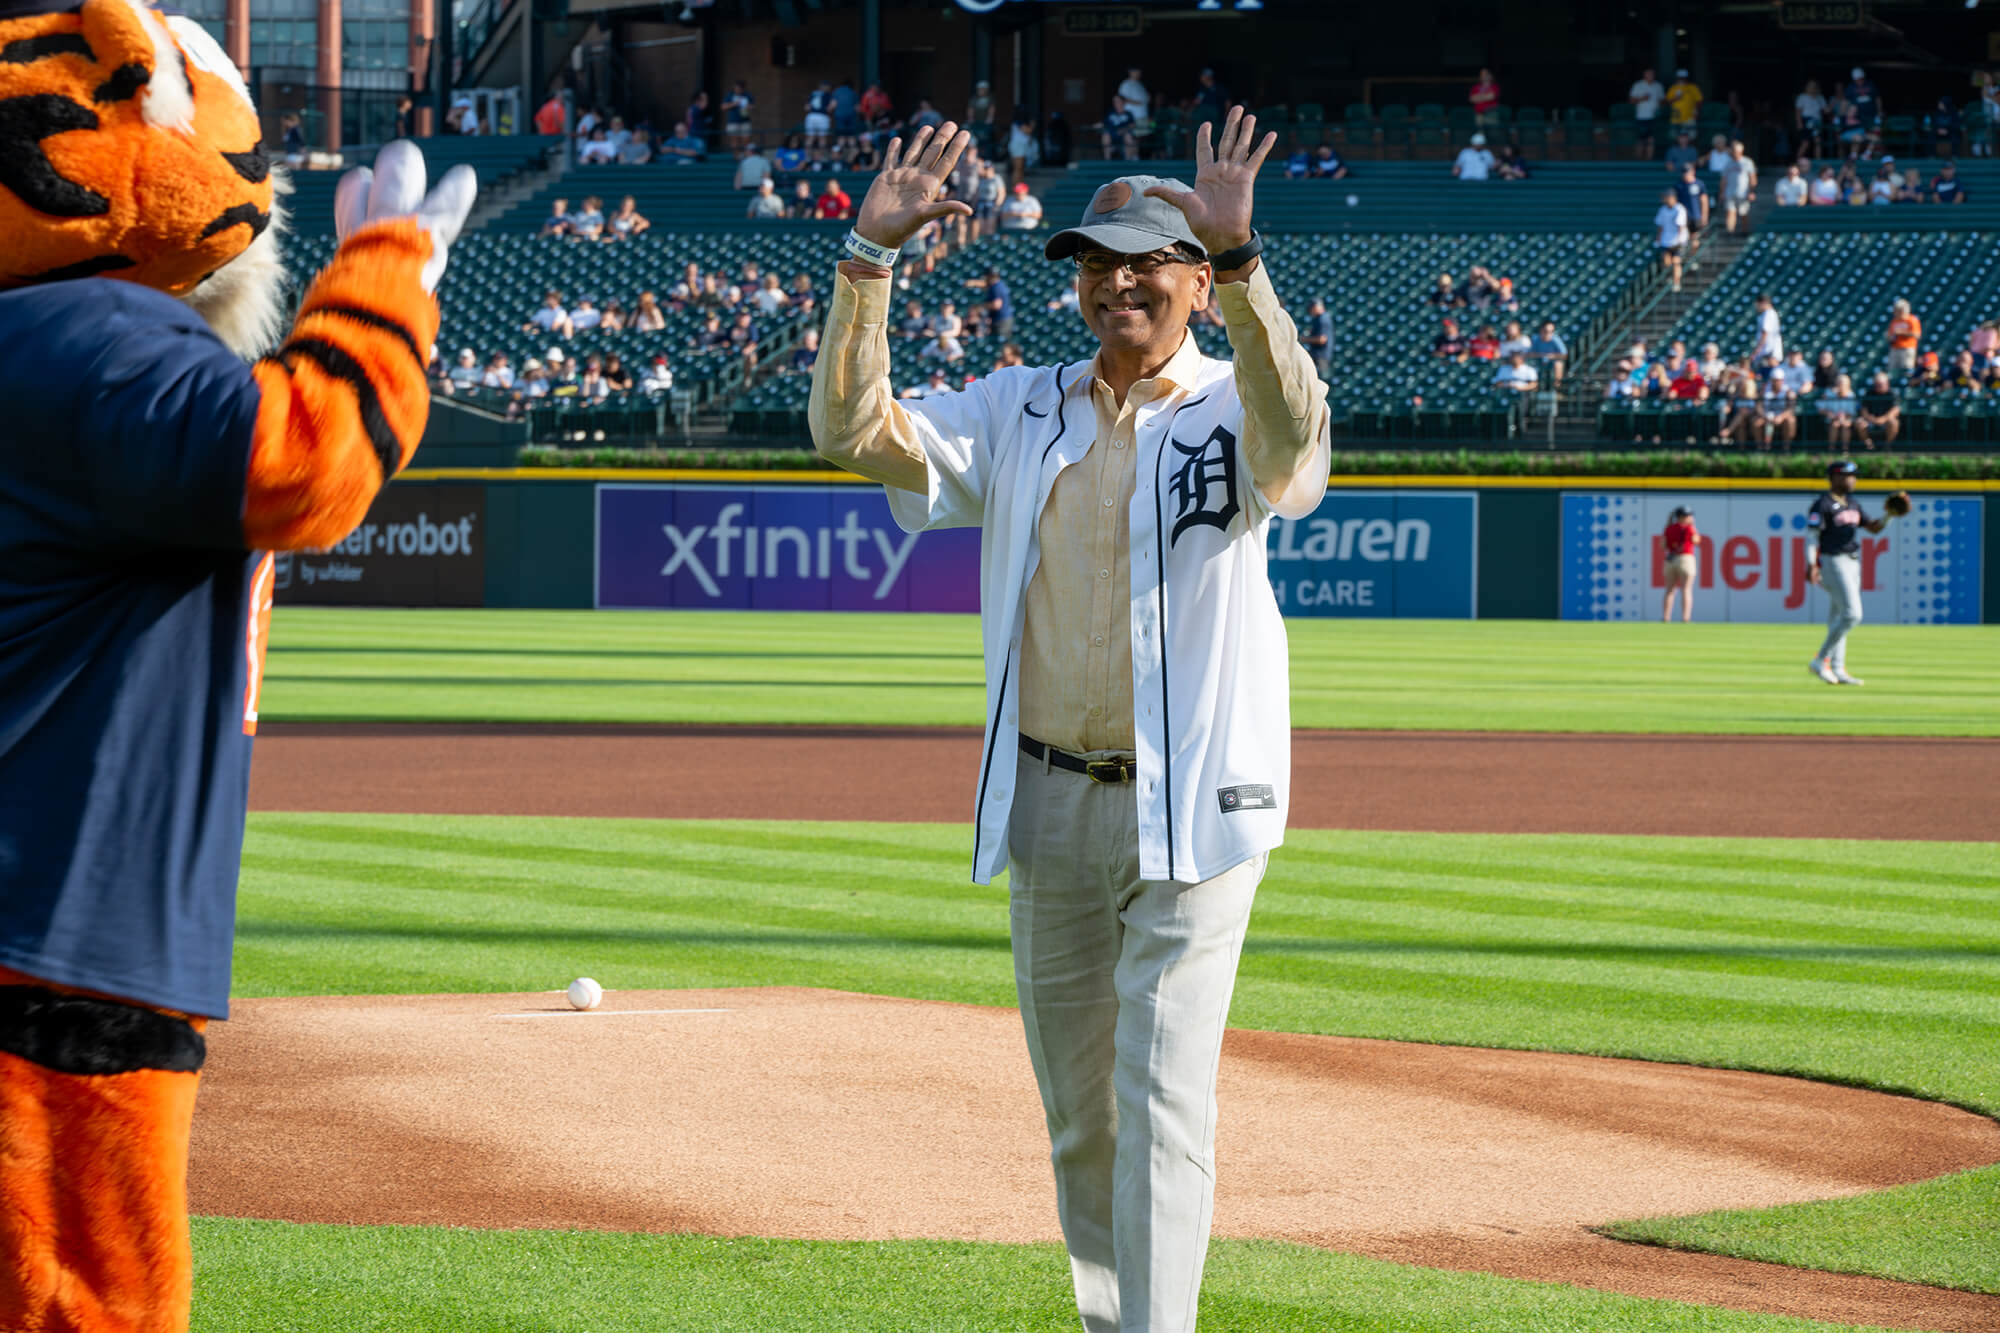 Suneel Sekhri delivers the game ball to the pitcher's mound during the Prostate Cancer Awareness Night game.